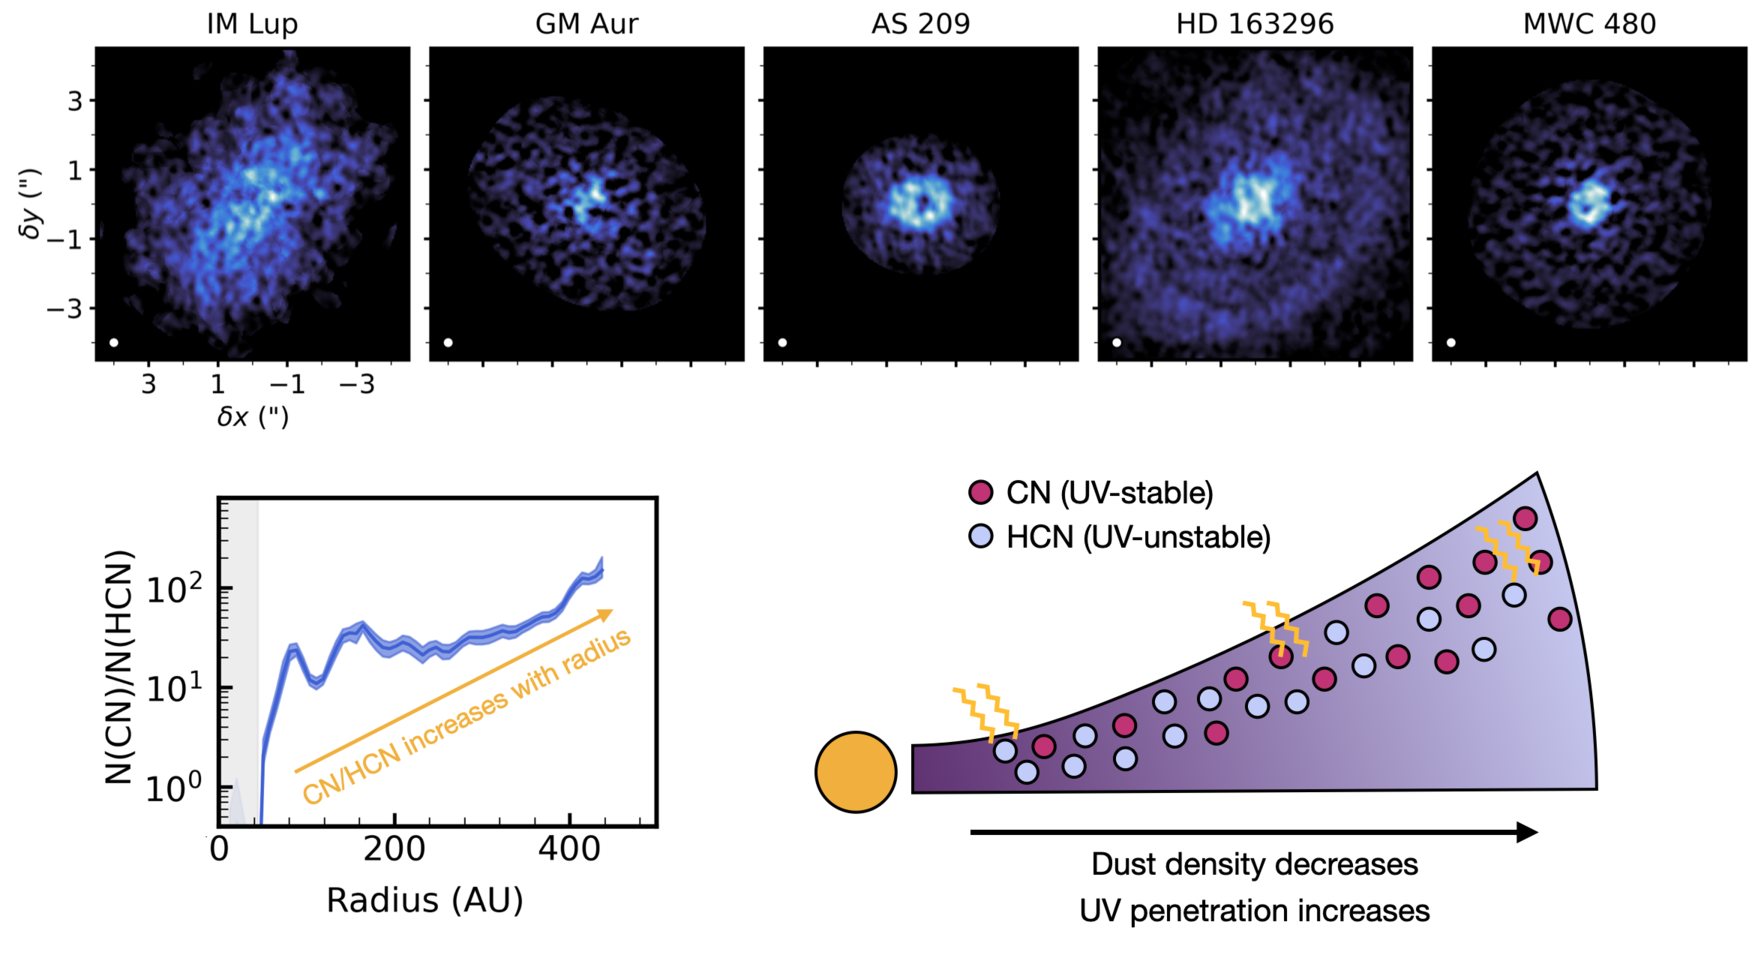 An image of CN emission in the five MAPS disk.  A figure showing the CN/HCN ratio increasing as a function of the disk radius.  A cartoon depicting how lower dust densities at larger disk radii allow more UV penetration, so HCN (UV-unstable) is destroyed but CN (UV-stable) can survive.